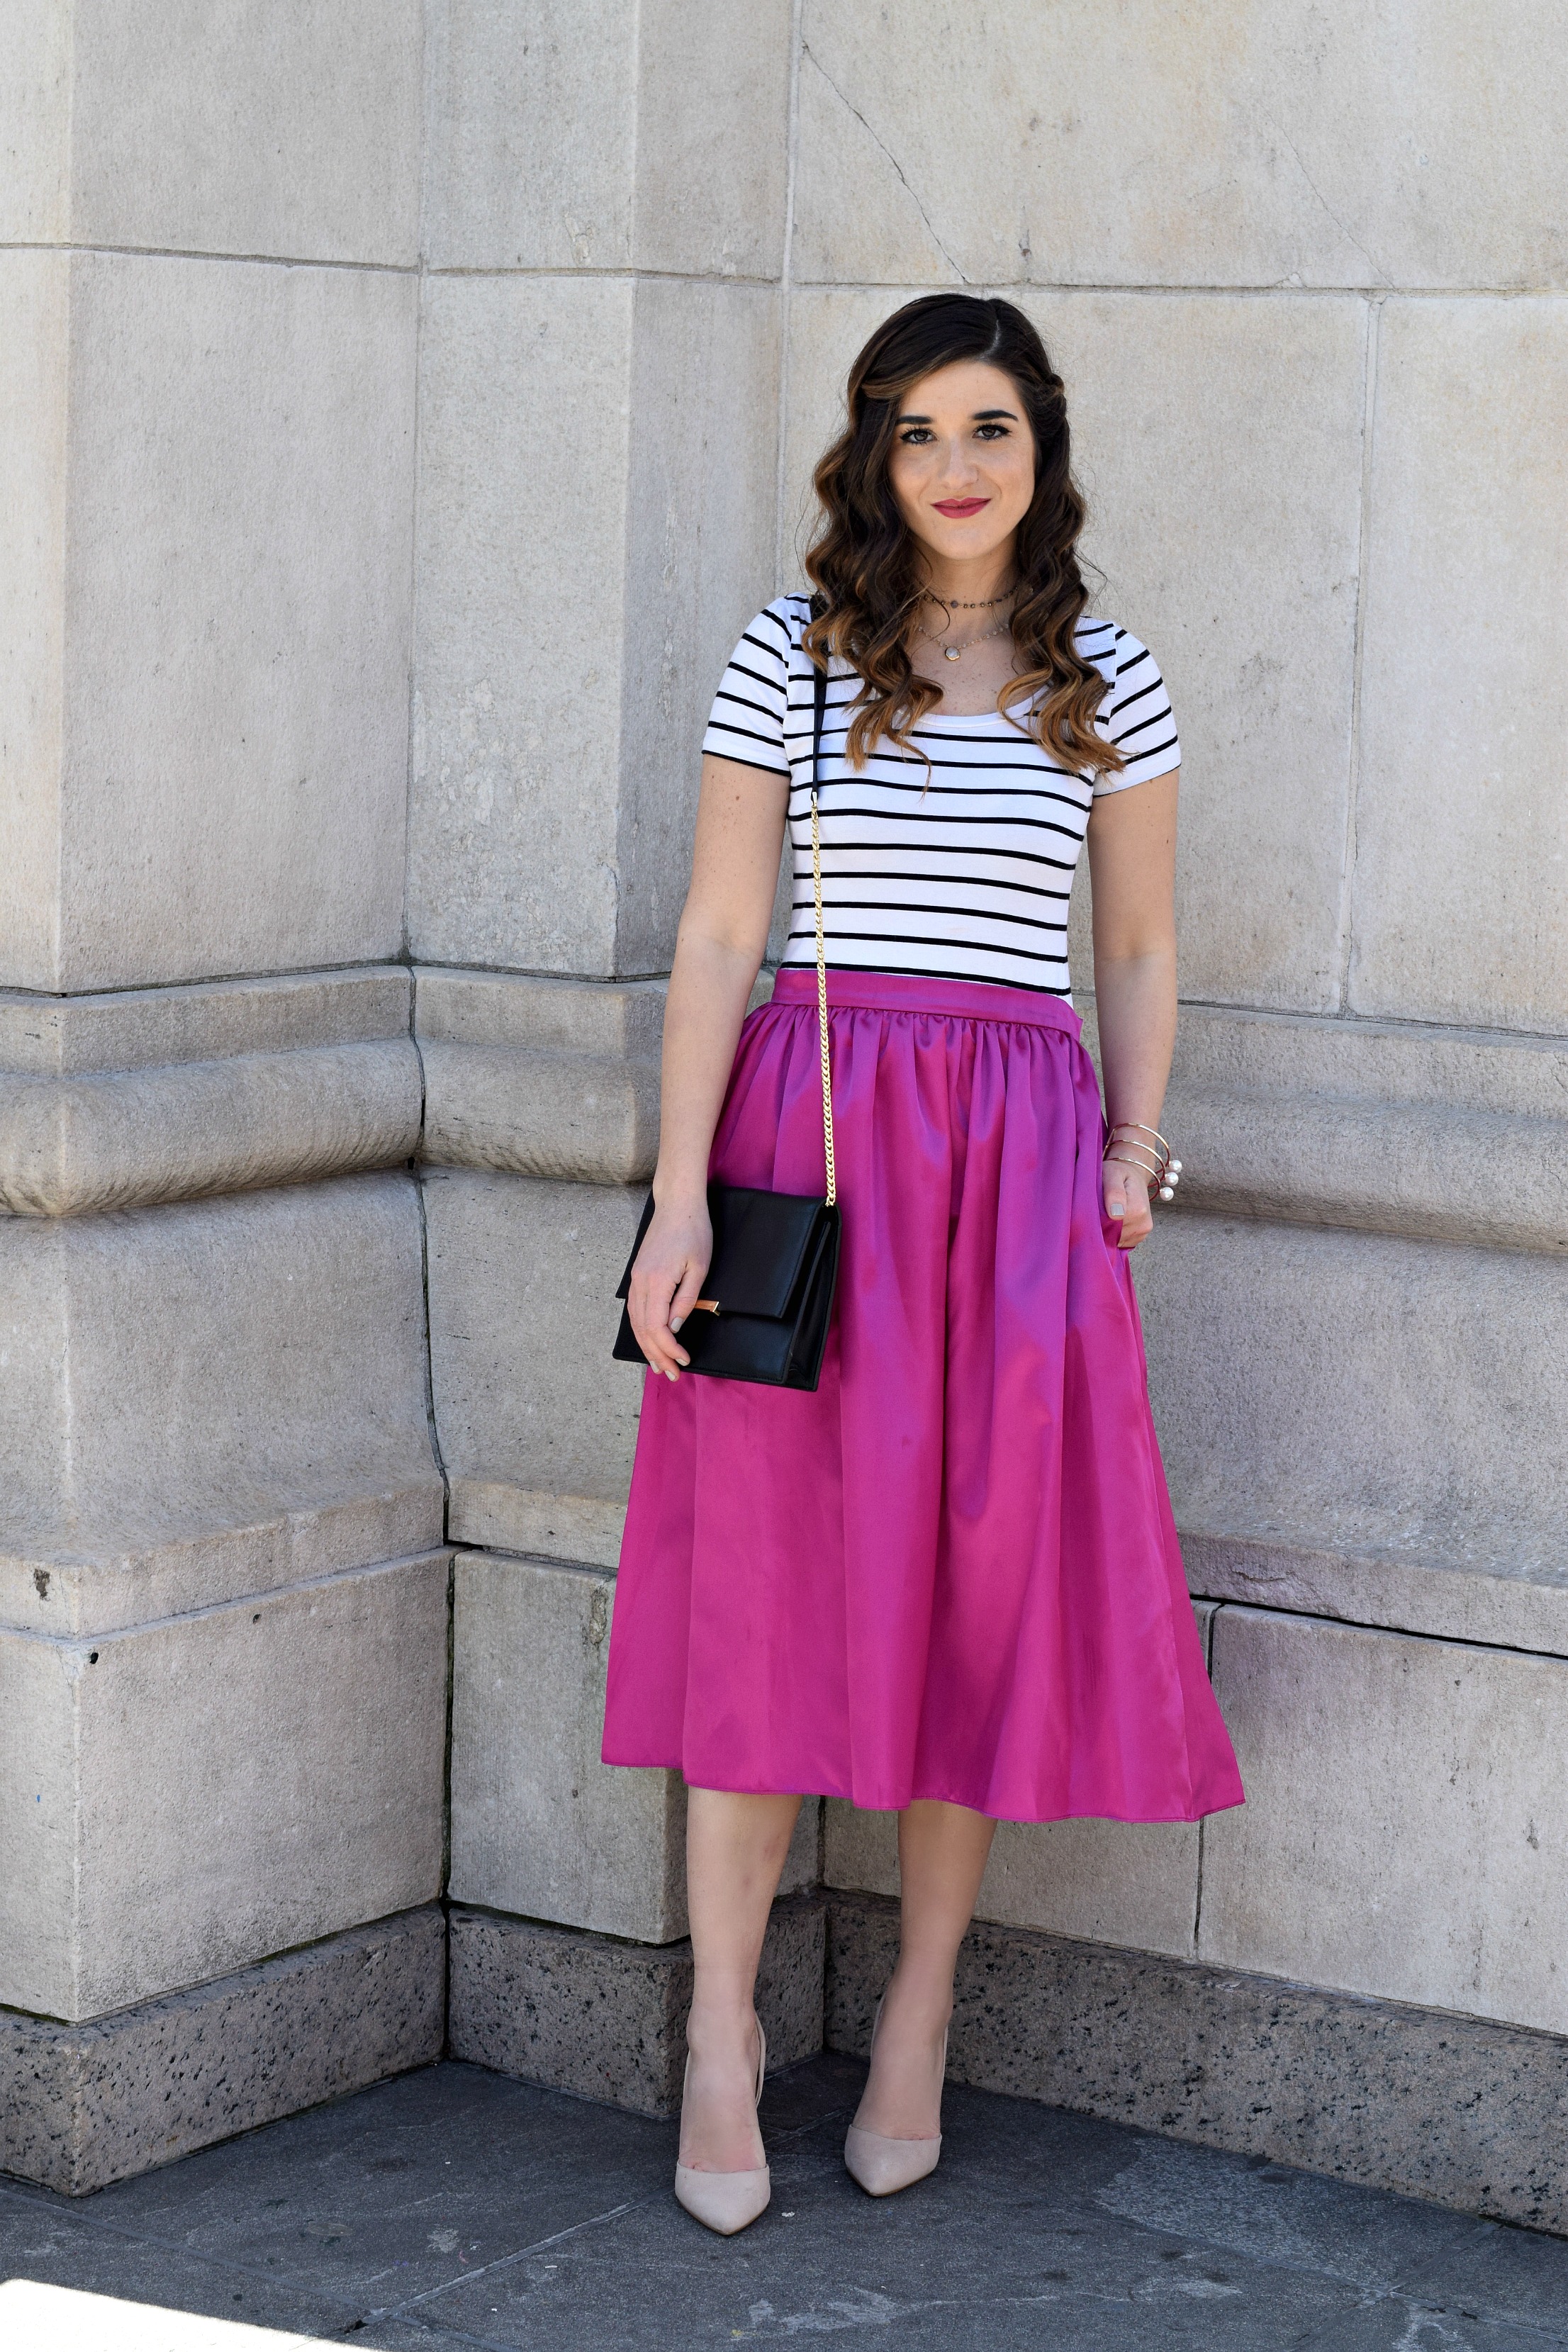 Fuchsia Party Skirt More Than Just Figleaves Louboutins & Love Fashion Blog Esther Santer NYC Street Style Blogger Outfit OOTD Midi Photoshoot Girl Women Striped Tee Ivanka Trump Black Purse Gold Jewelry Bracelet Choker Nude Shoes Heels Steve Madden.jpg